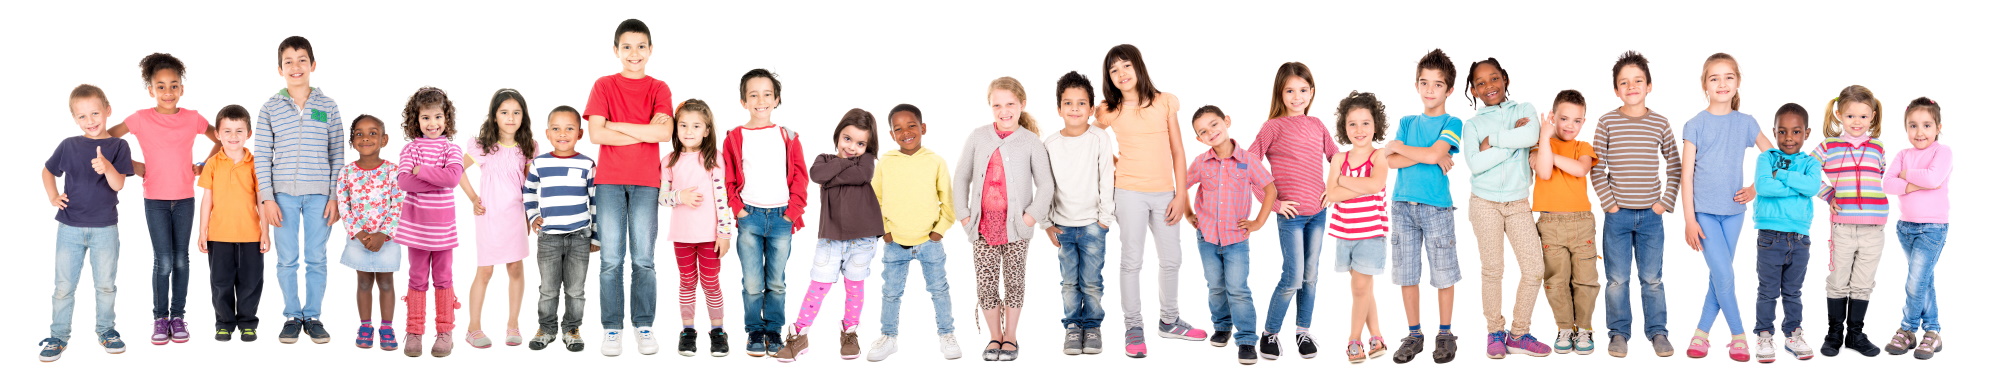 Image of children standing side by side